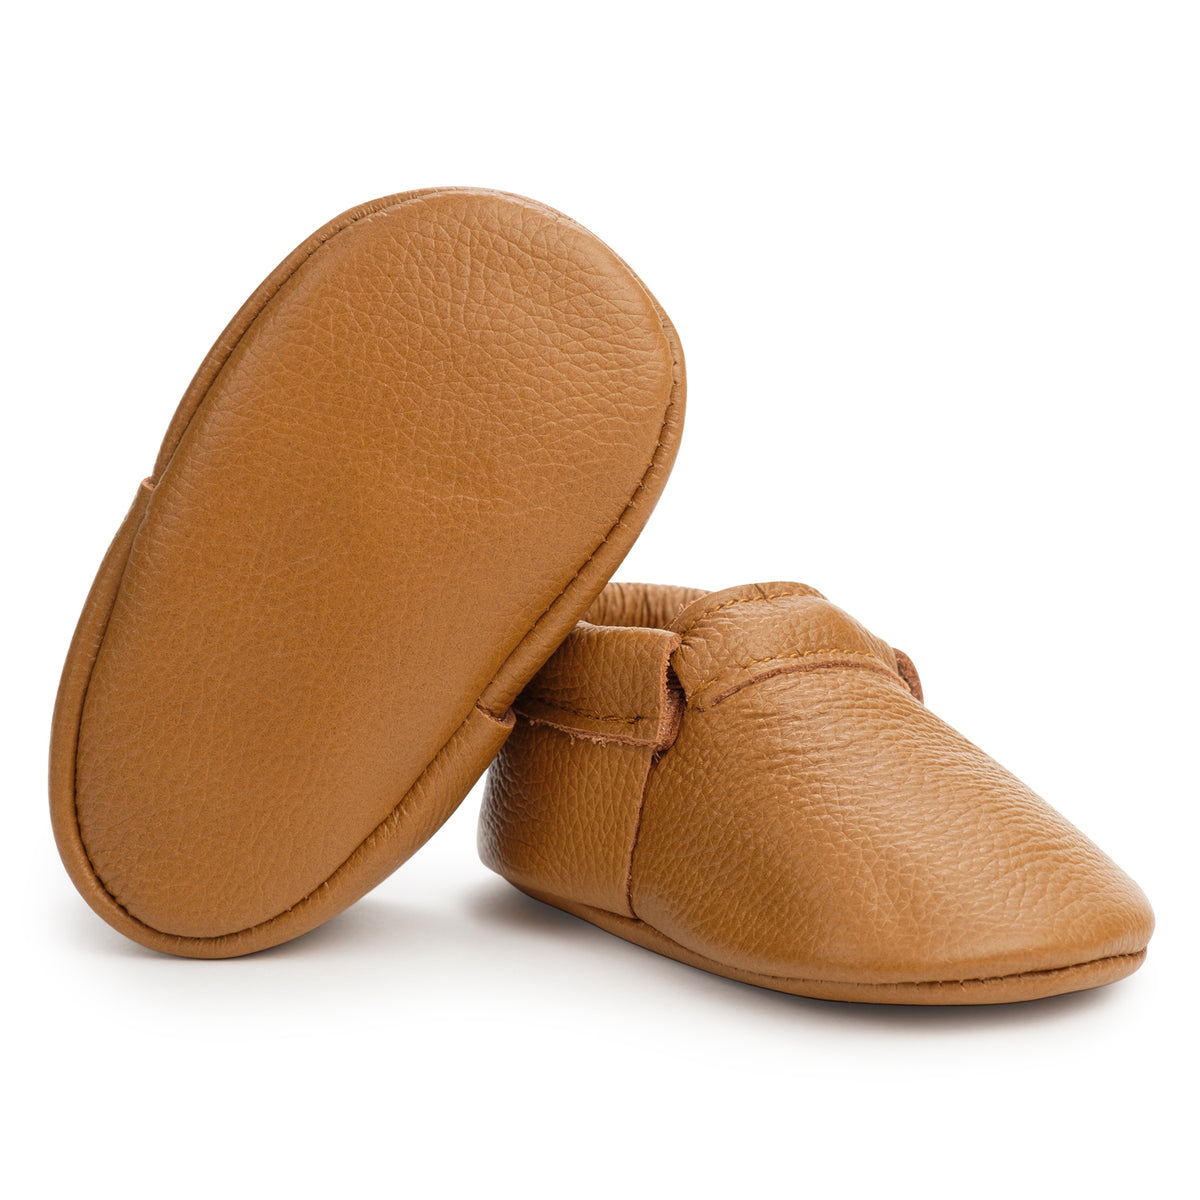 Classic Brown Fringeless Moccasins